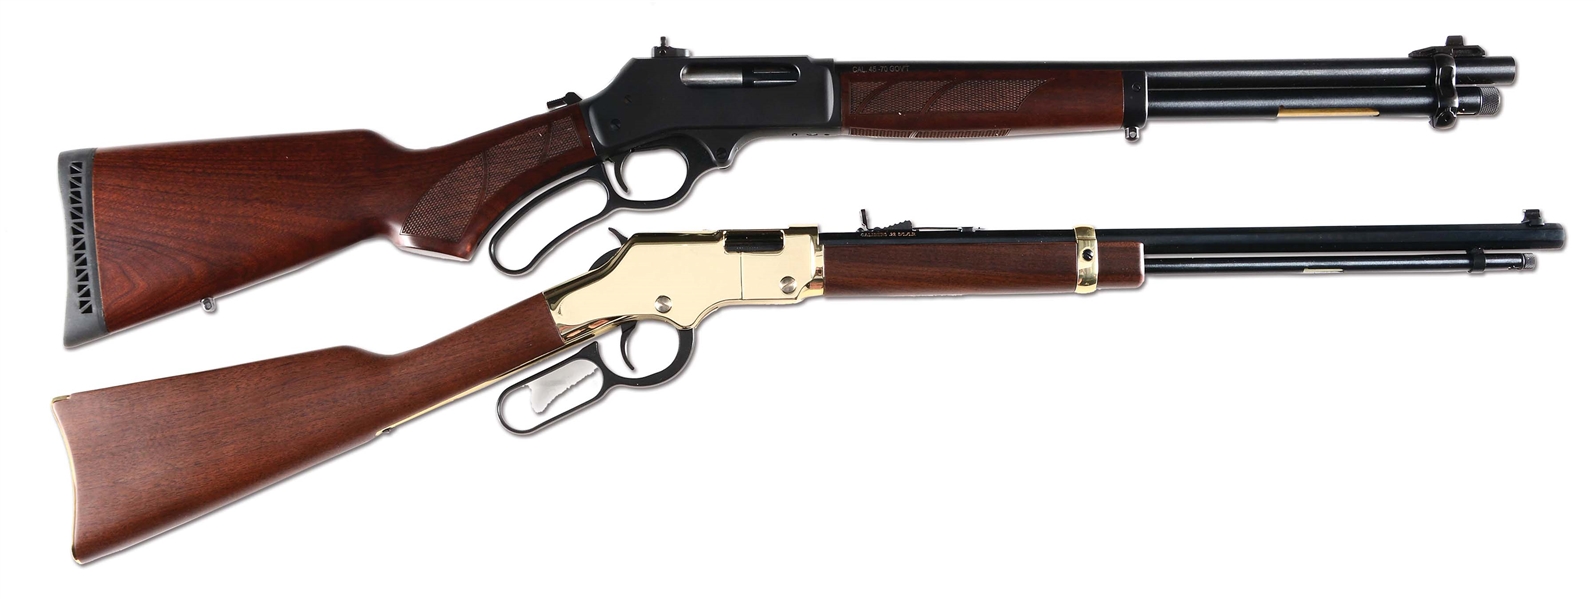 (M) LOT OF 2: ONE NIB HENRY GOLDEN BOY LEVER ACTION RIFLE AND ONE NIB HENRY H010 LEVER ACTION RIFLE.